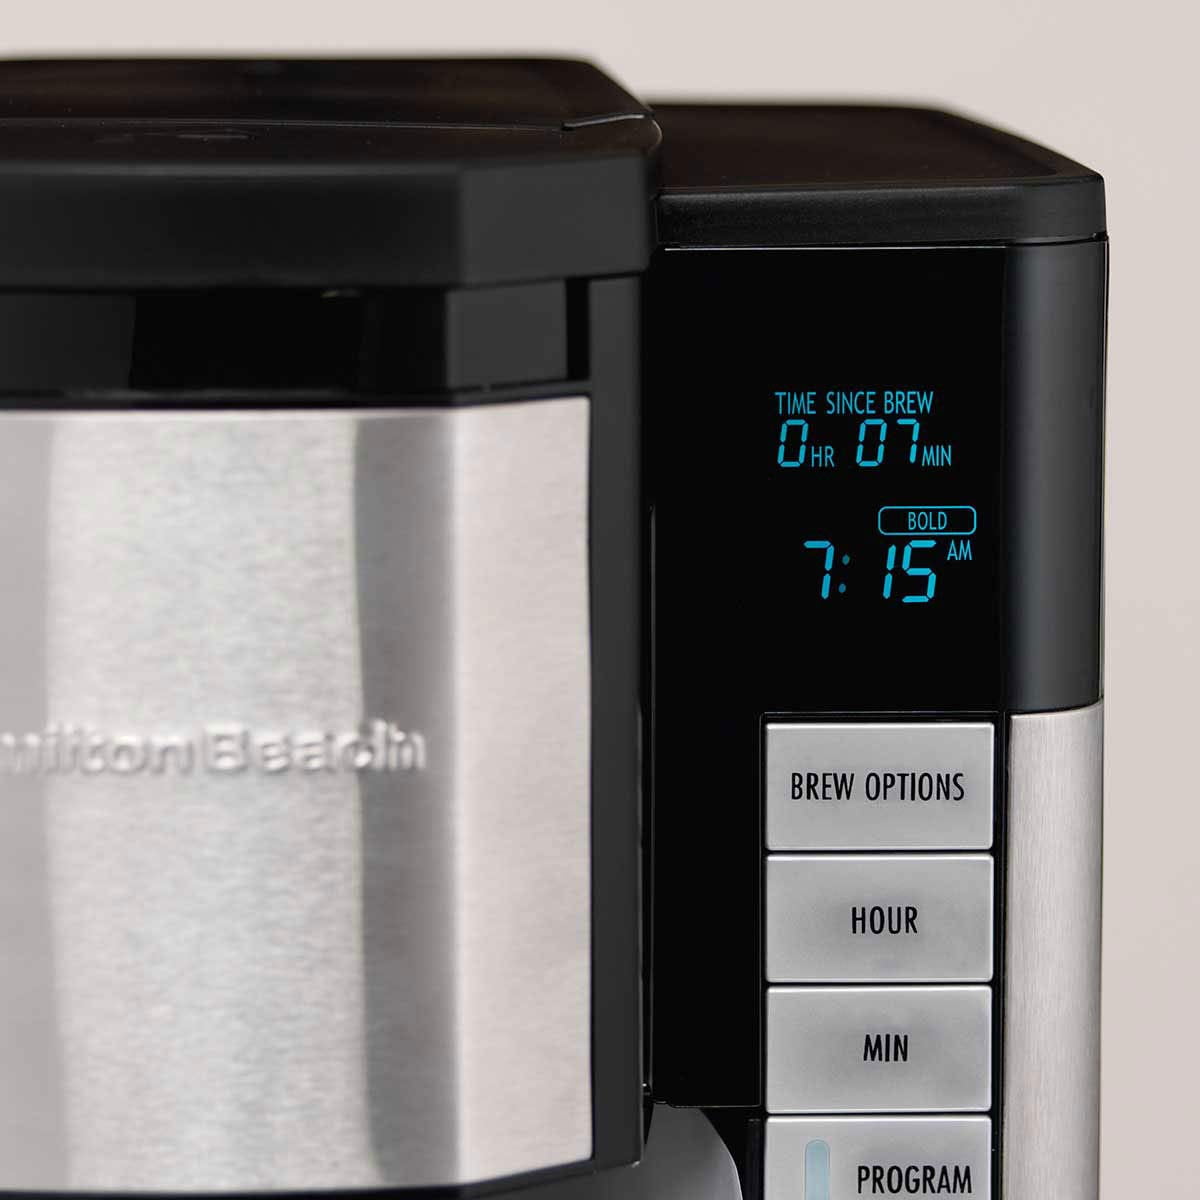 Hamilton Beach's 12-Cup Coffee Maker w/ LCD display is down to $28